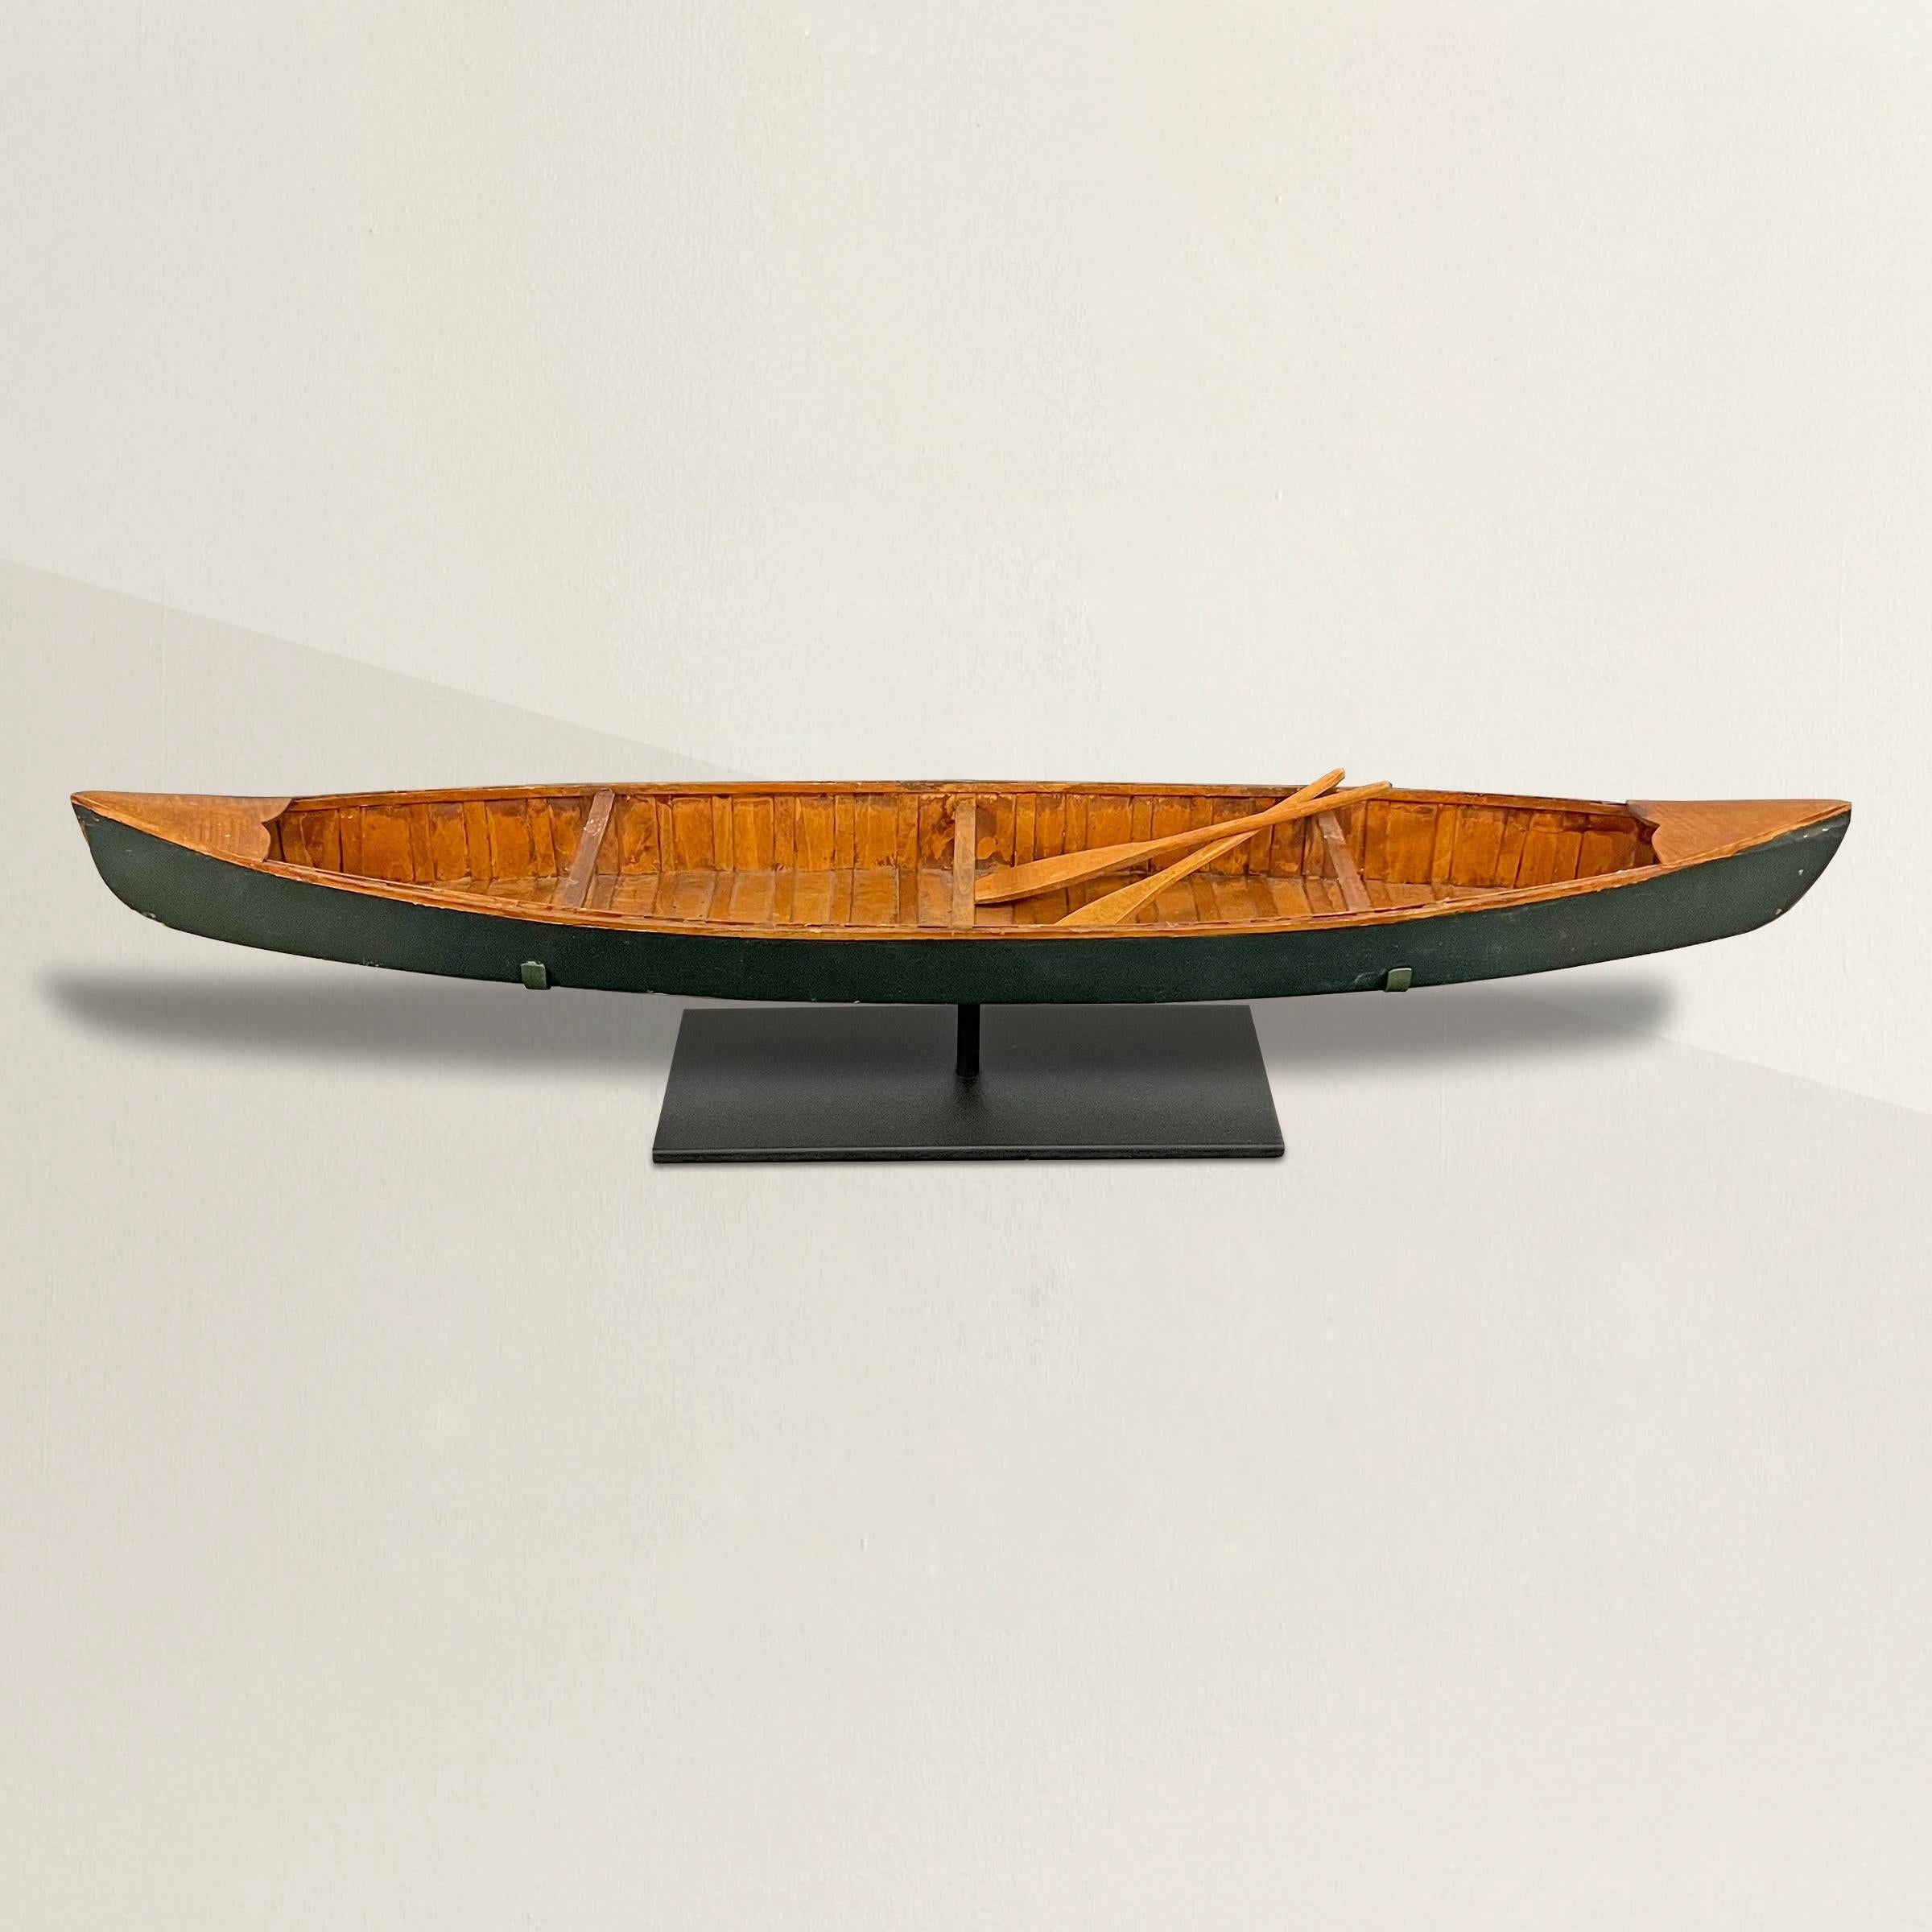 A whimsical mid-20th century American Folk Art hand built wooden canoe with removable oars, painted green, and mounted on a custom steel stand. The perfect gift for the outdoors person in your life!